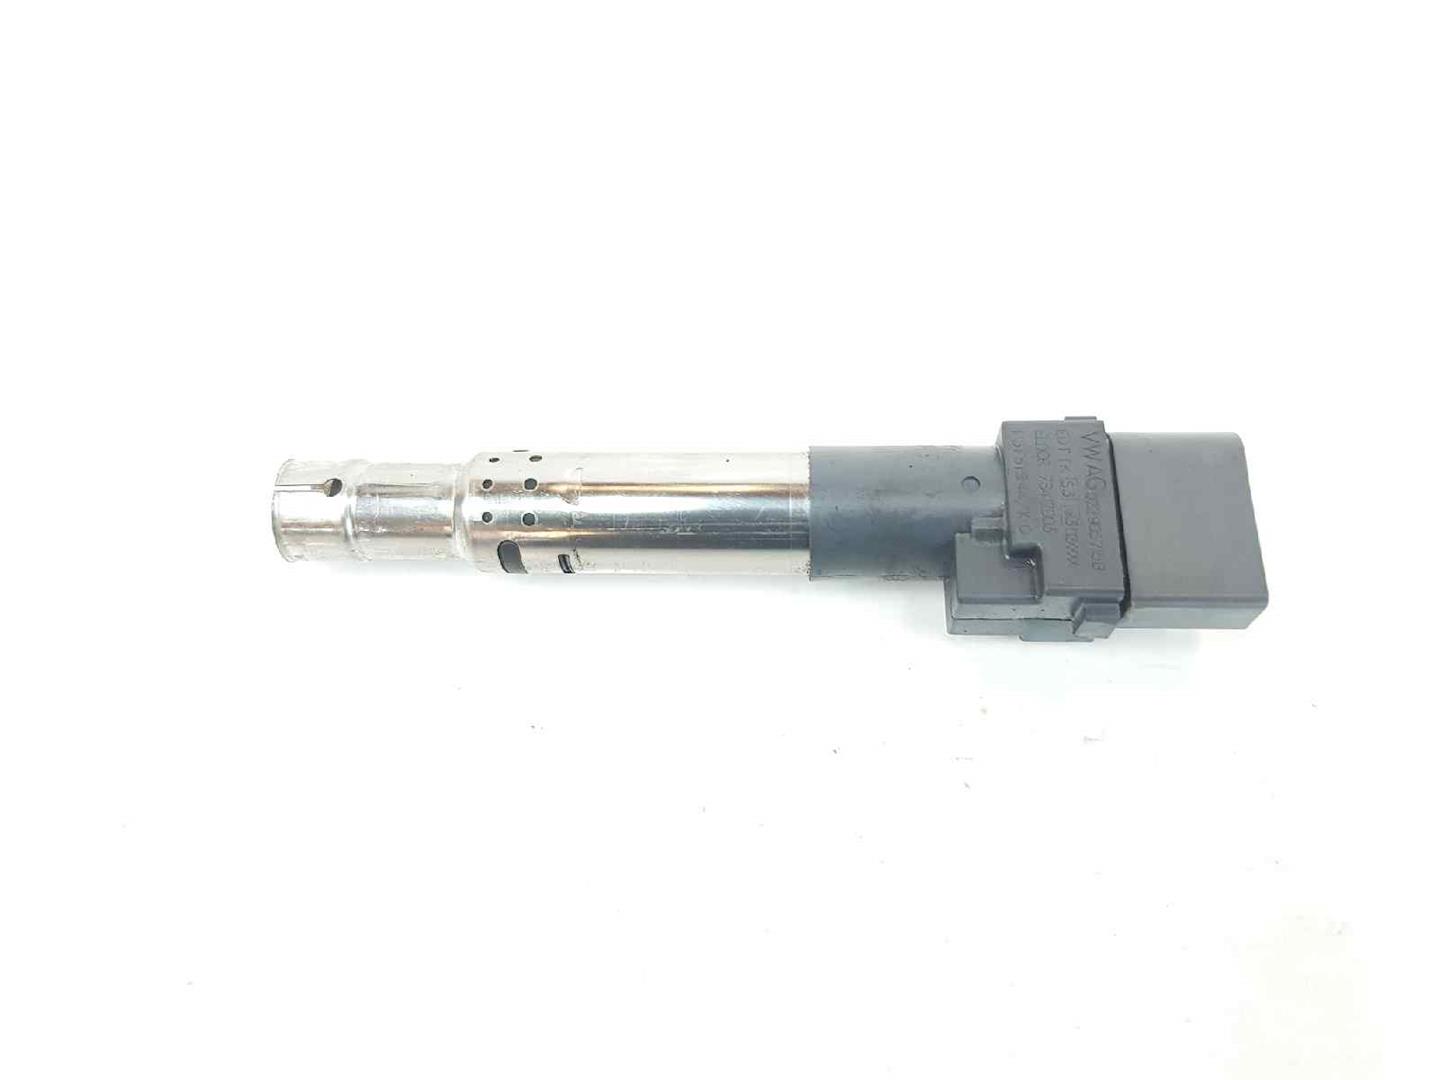 AUDI A2 8Z (1999-2005) High Voltage Ignition Coil 022905715B, 022905715B 19686368